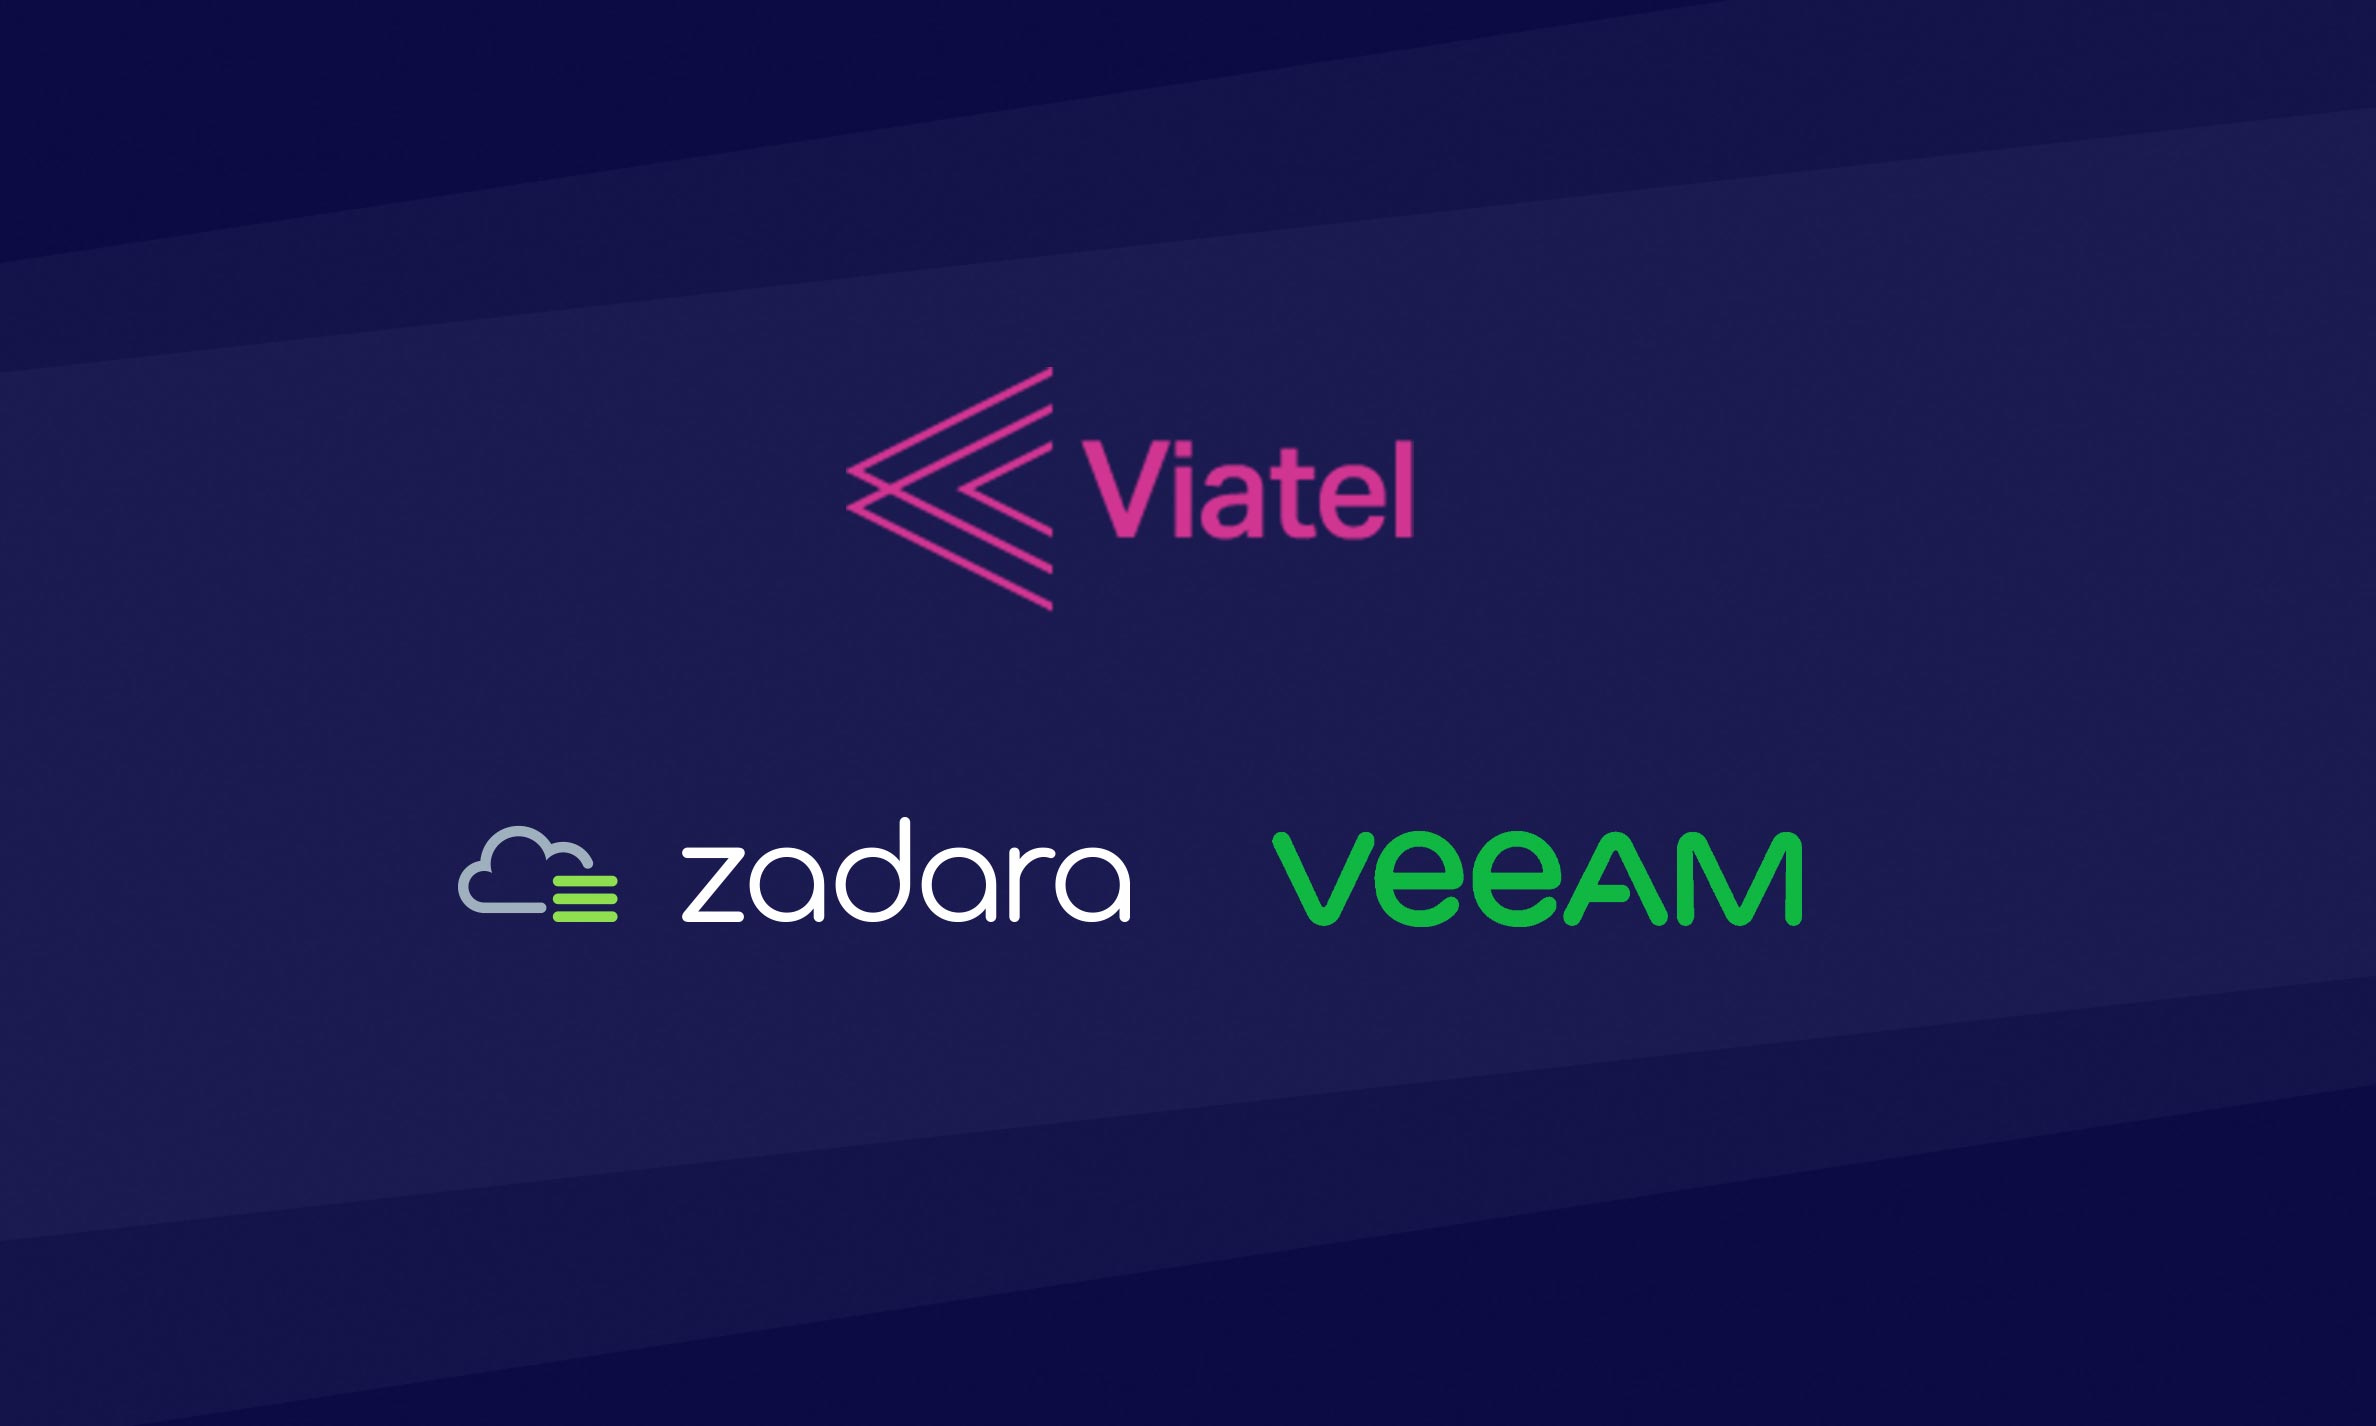 Viatel first to deliver fully managed Backup-as-a-Service solution with 100% ransomware protection to Irish businesses in partnership with Veeam & Zadara